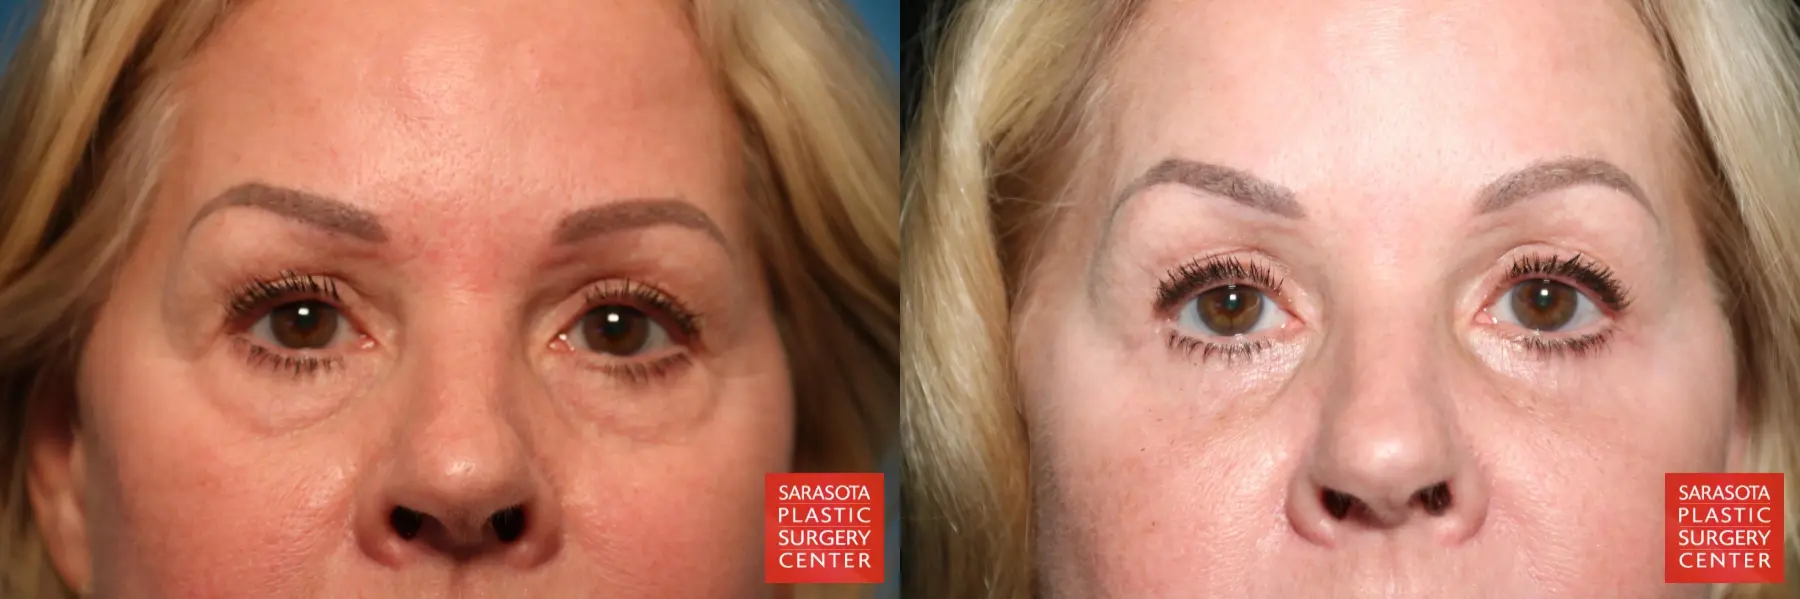 Eyelid Surgery: Patient 11 - Before and After  